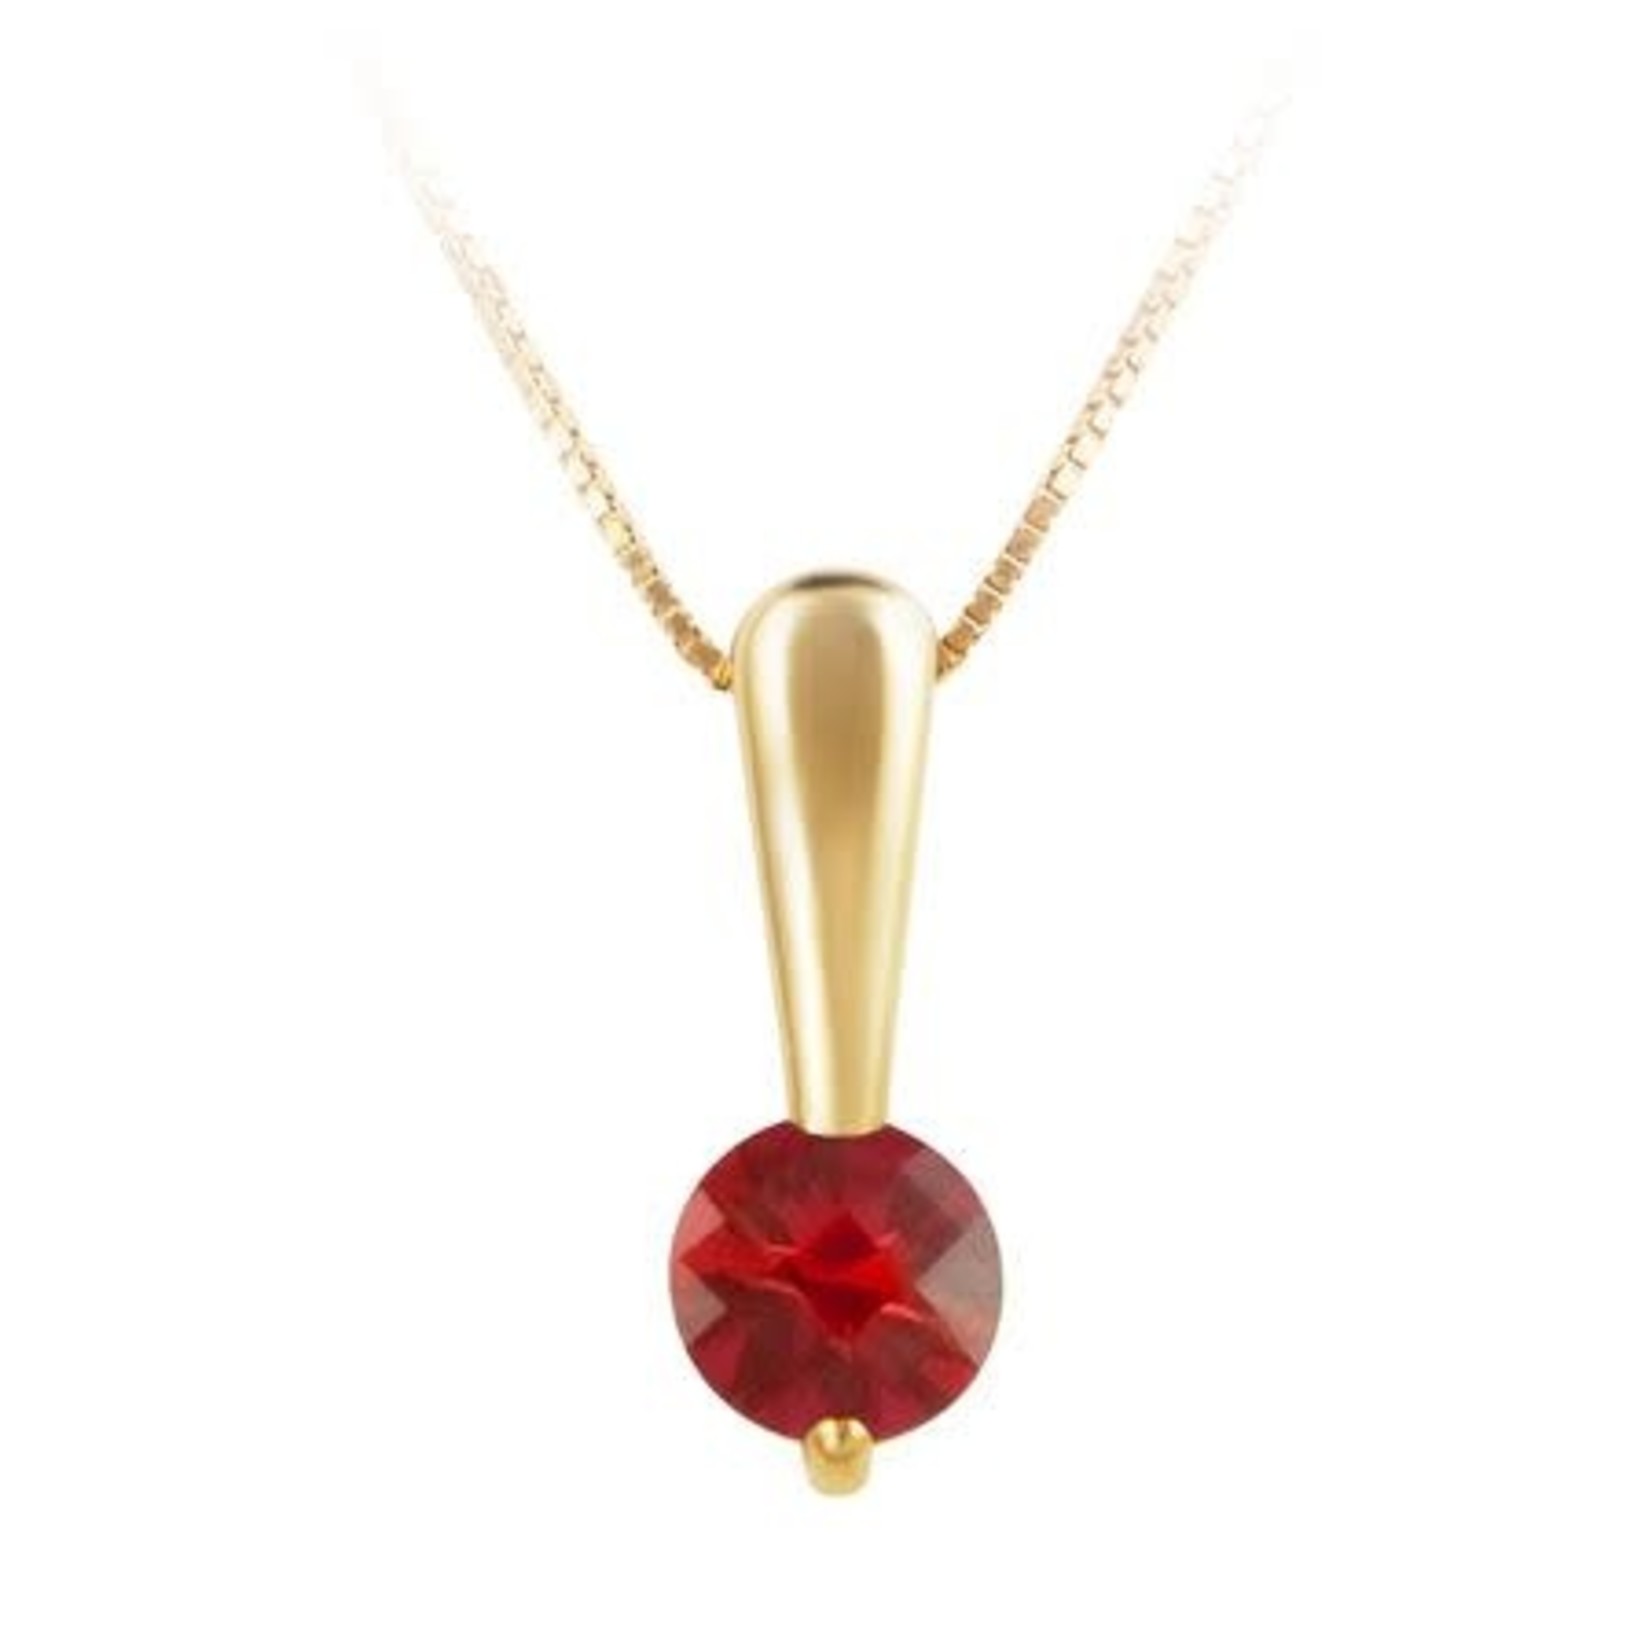 A.NEAL ORIGINALS 10K 5mm Round Lab Created Ruby Pendant w/Chain